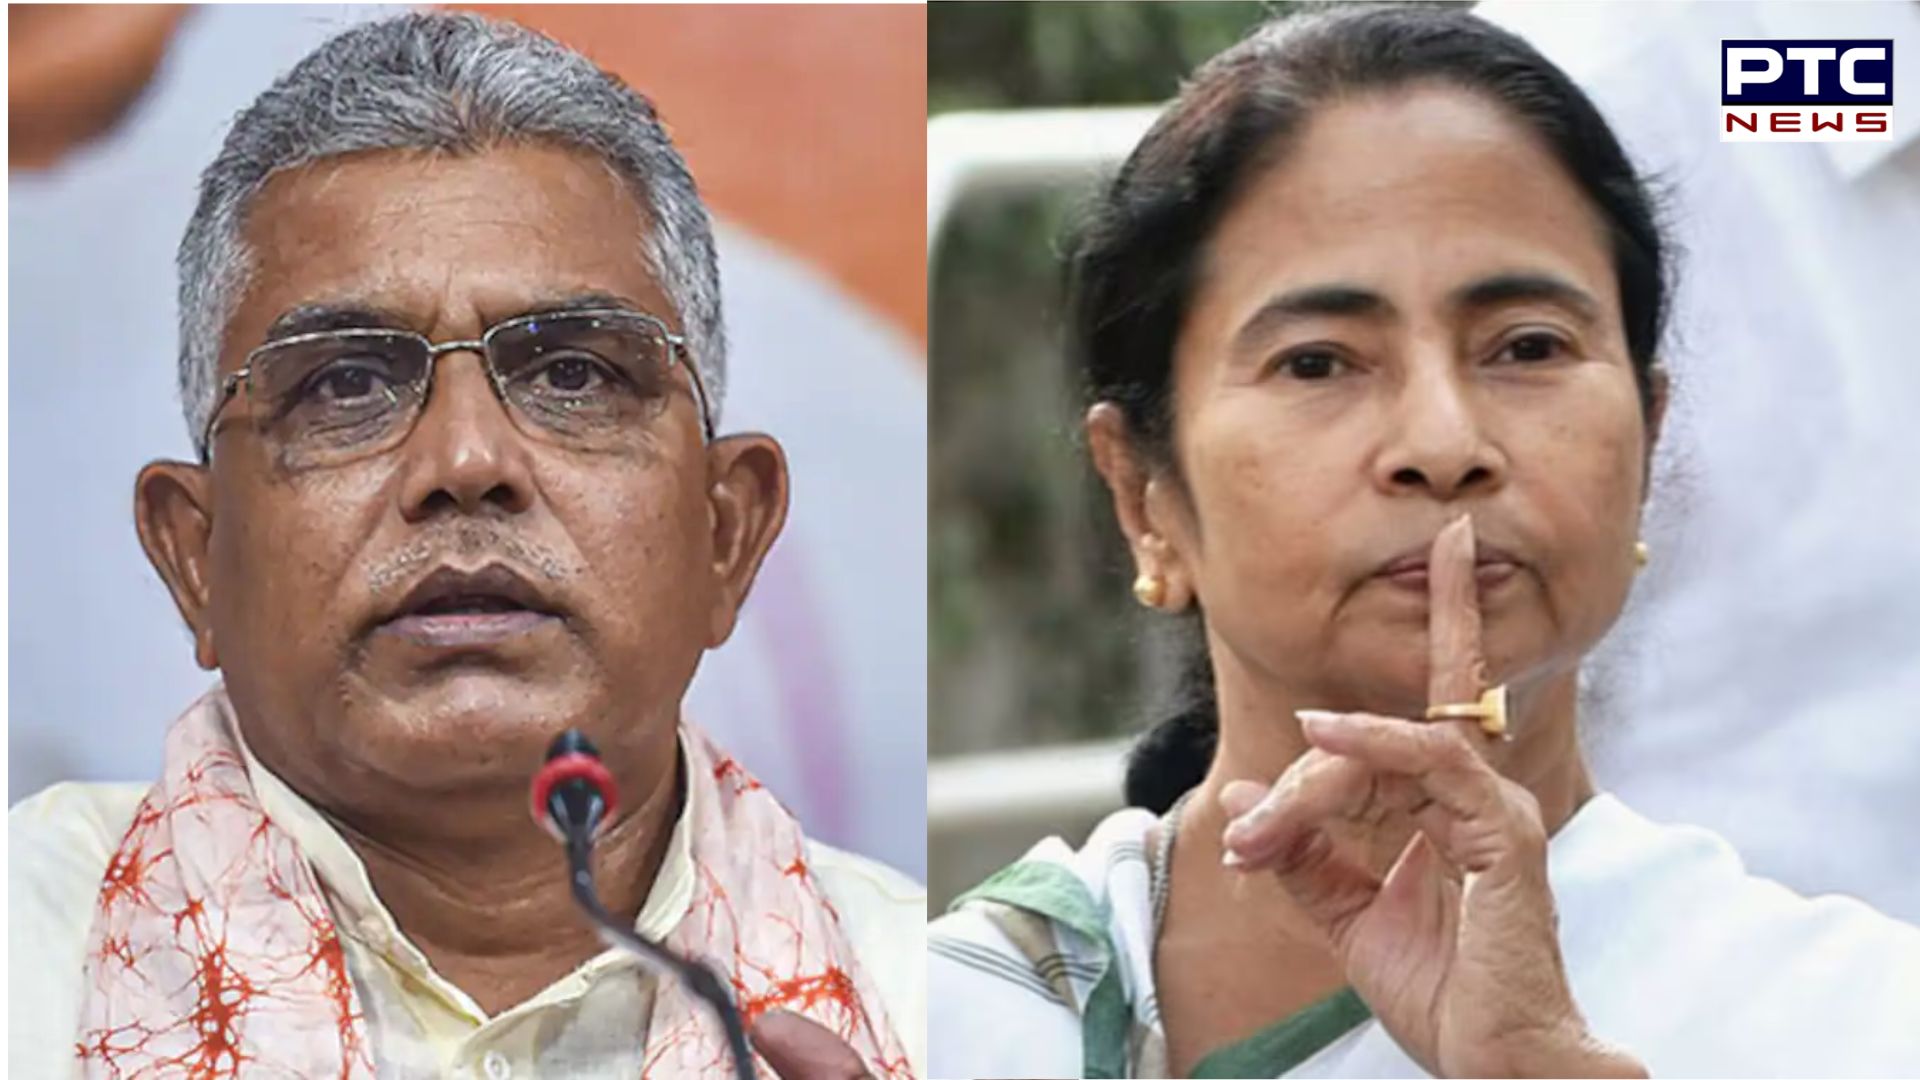 'She should first decide who her father is': BJP leader Dilip Ghosh courts controversy over remarks against Mamata Banerjee